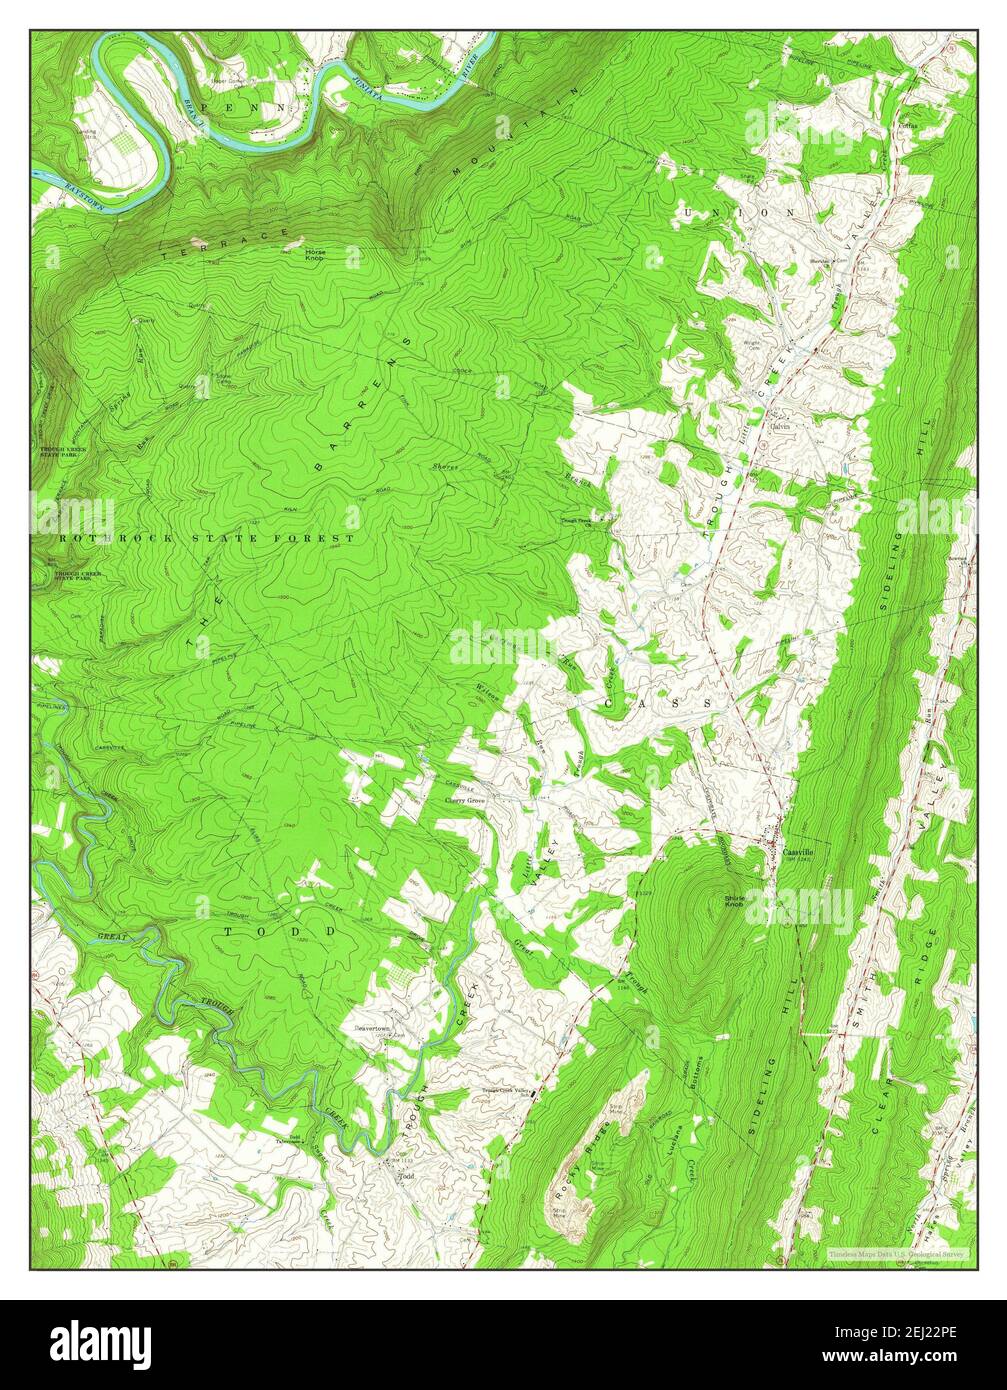 Cassville, Pennsylvania, map 1963, 1:24000, United States of America by Timeless Maps, data U.S. Geological Survey Stock Photo